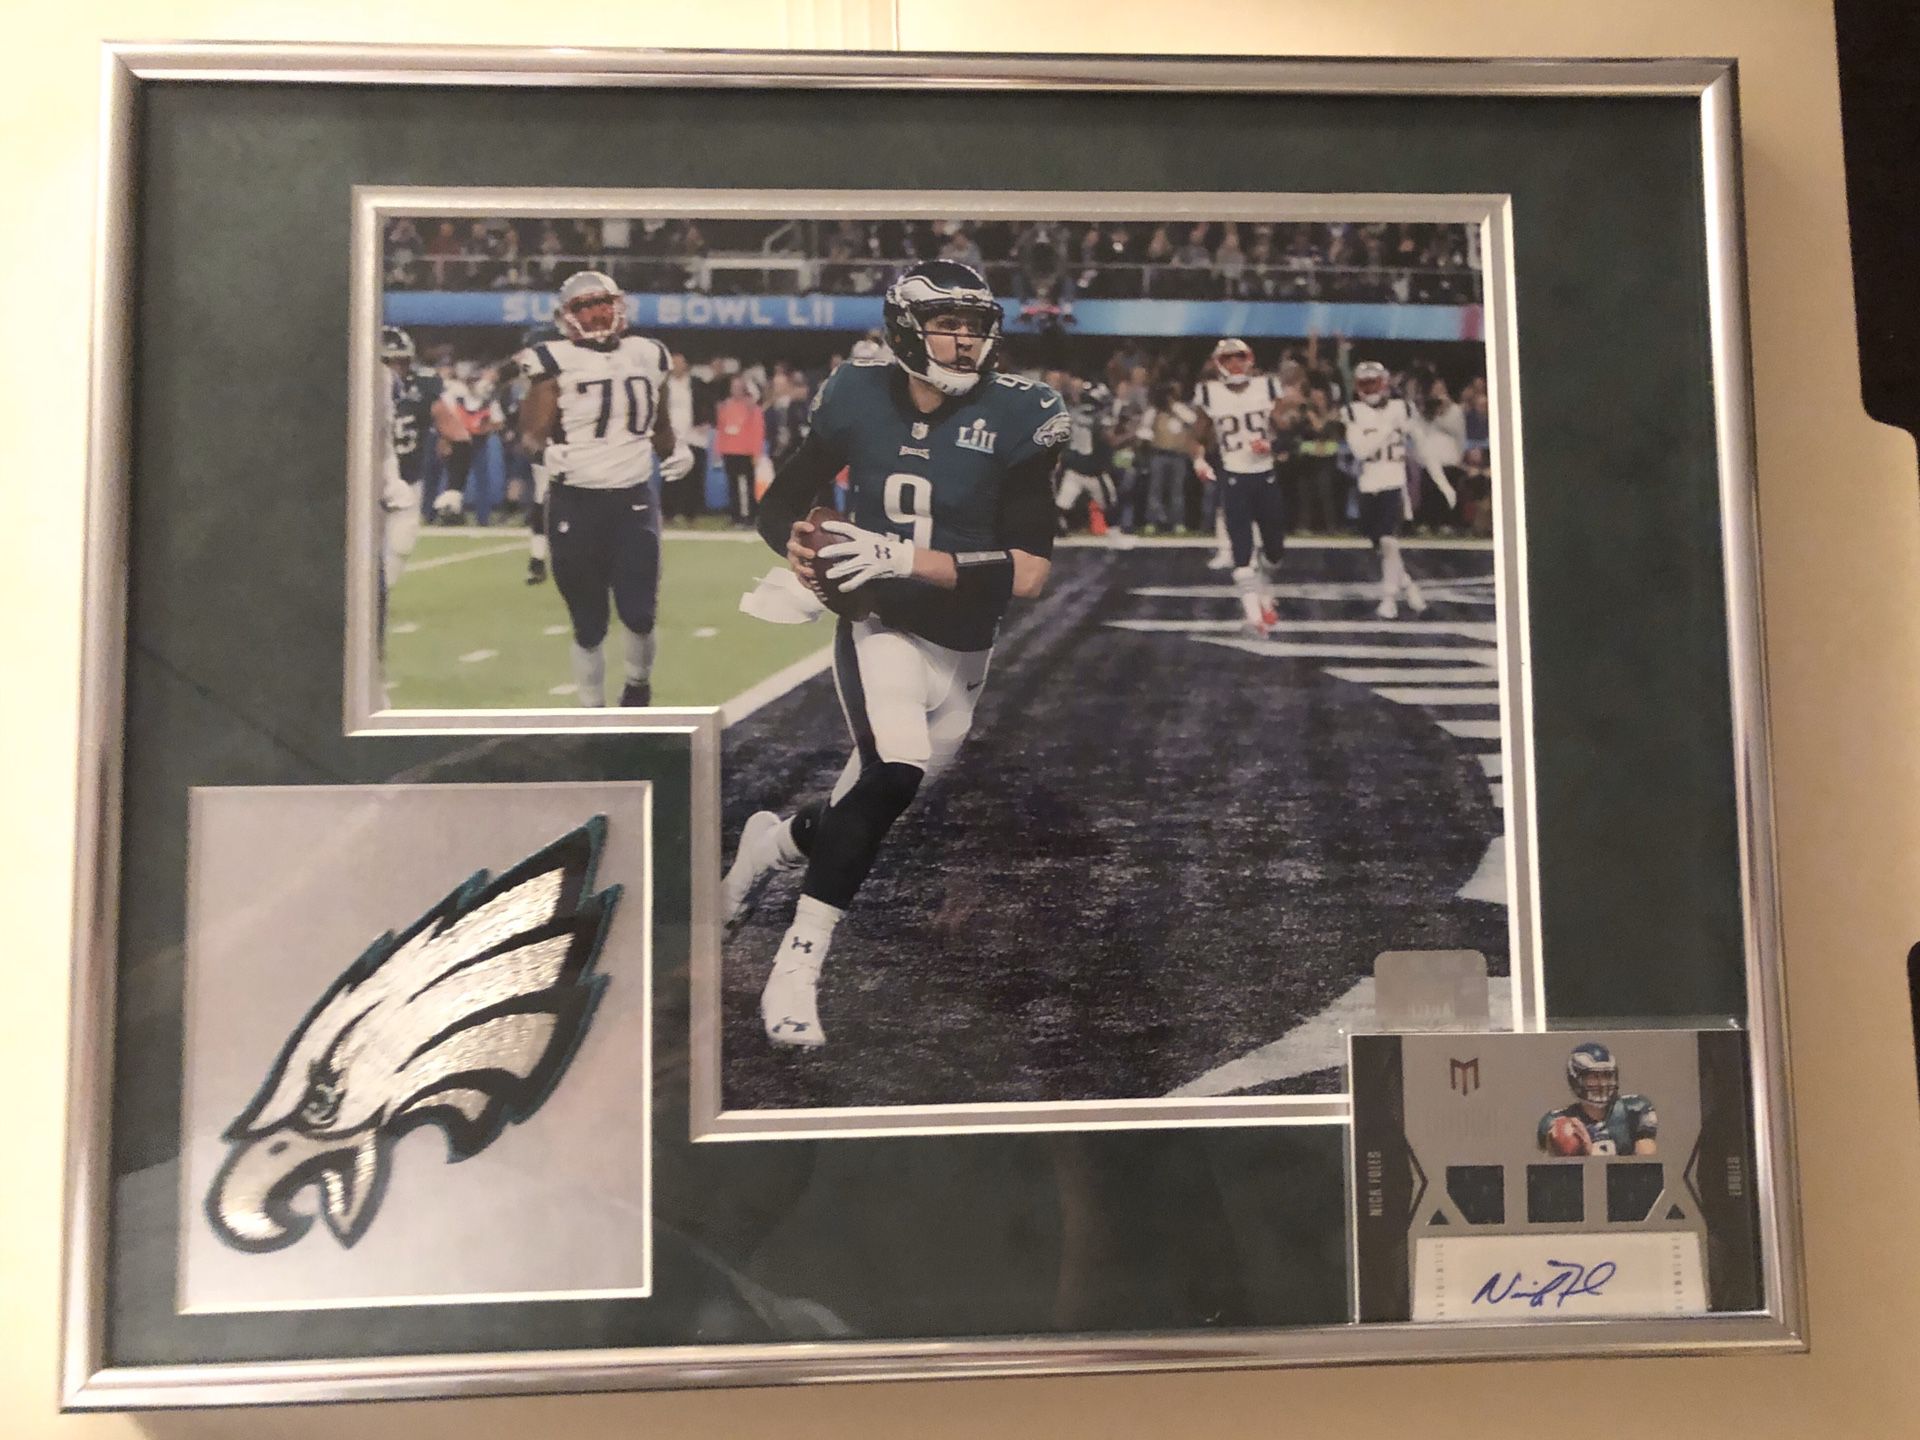 Nick Foles Autographed Rookie Card w/ 8x10 Photo Framed in Double Matted Eagles Green Suede & Vintage Silver w/ Embroidered Eagles 🦅 Patch